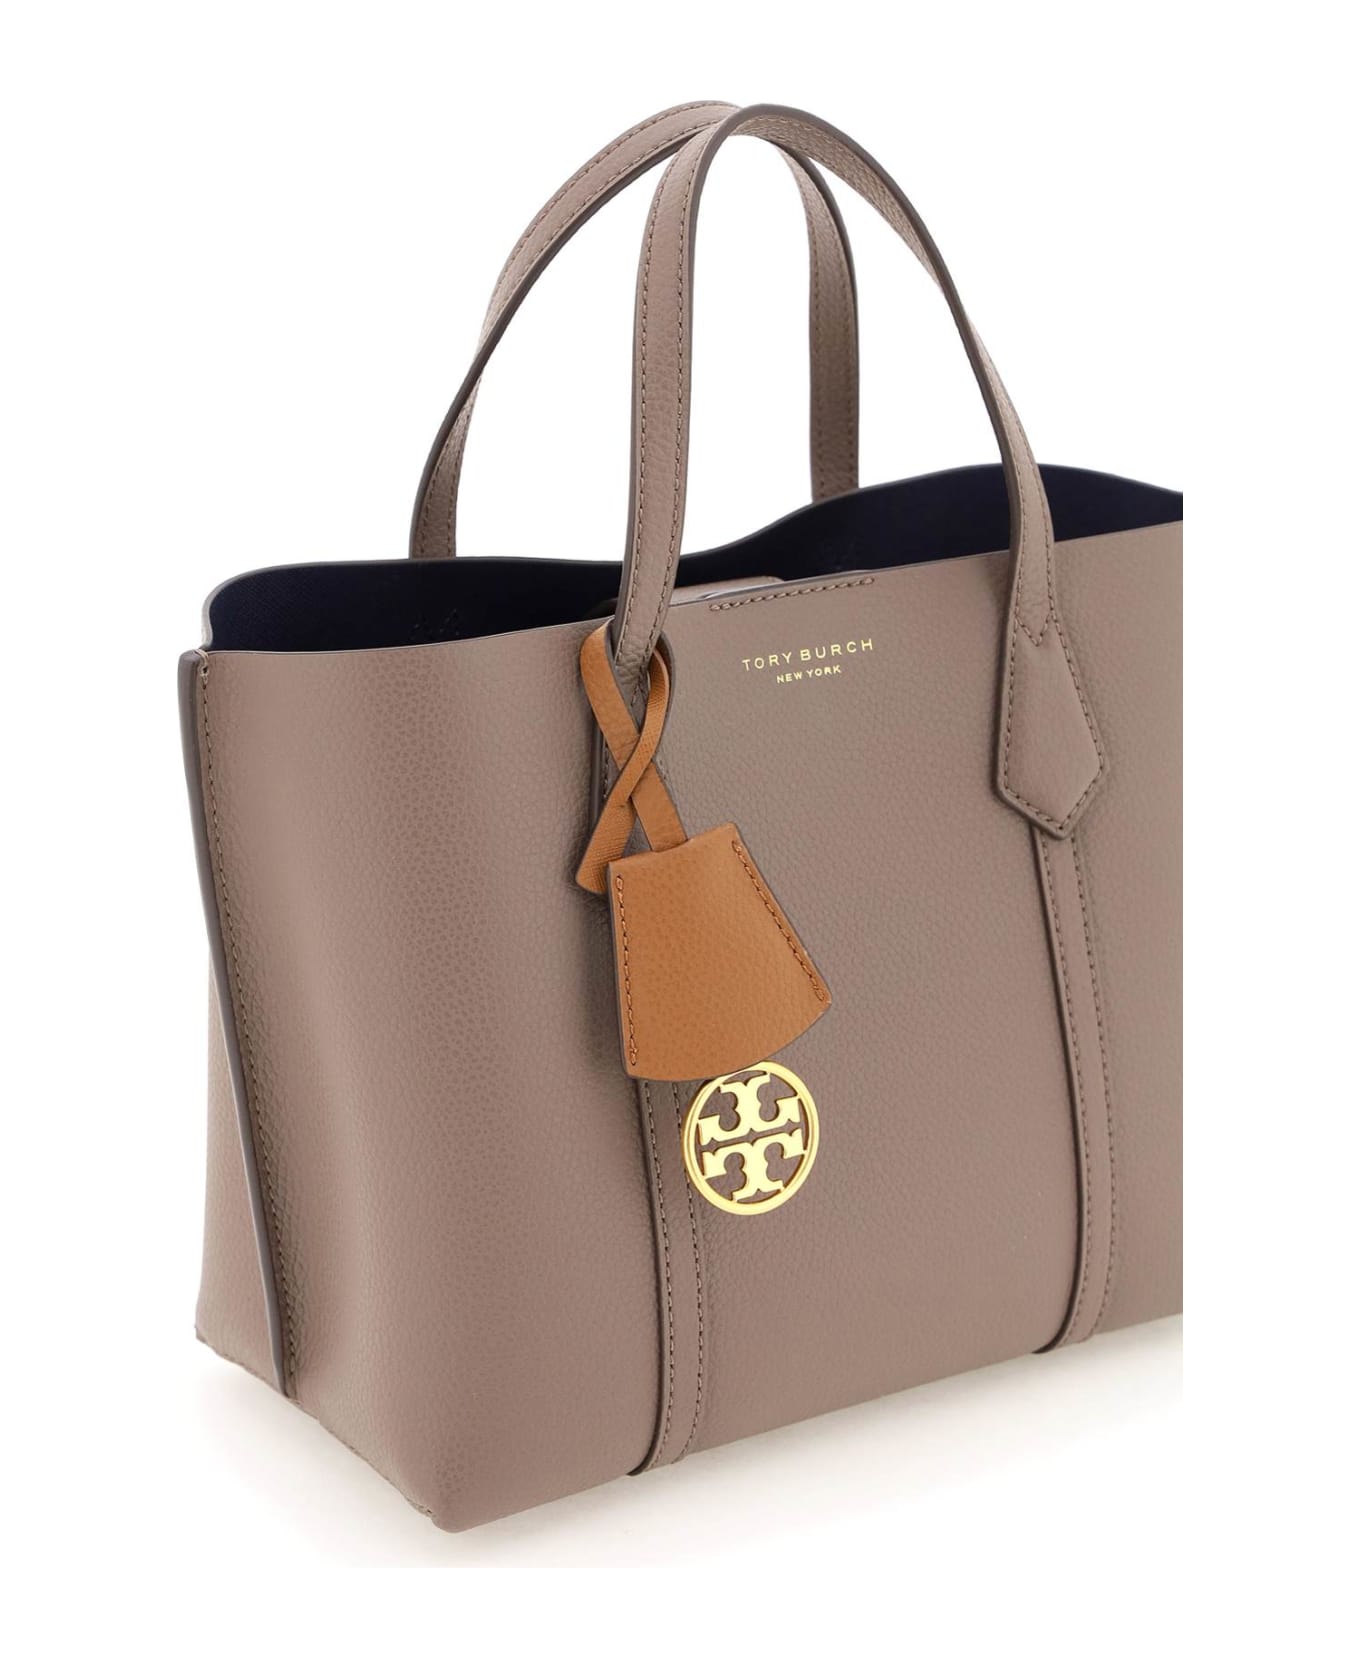 Tory Burch Perry Shopping Bag - Grey トートバッグ